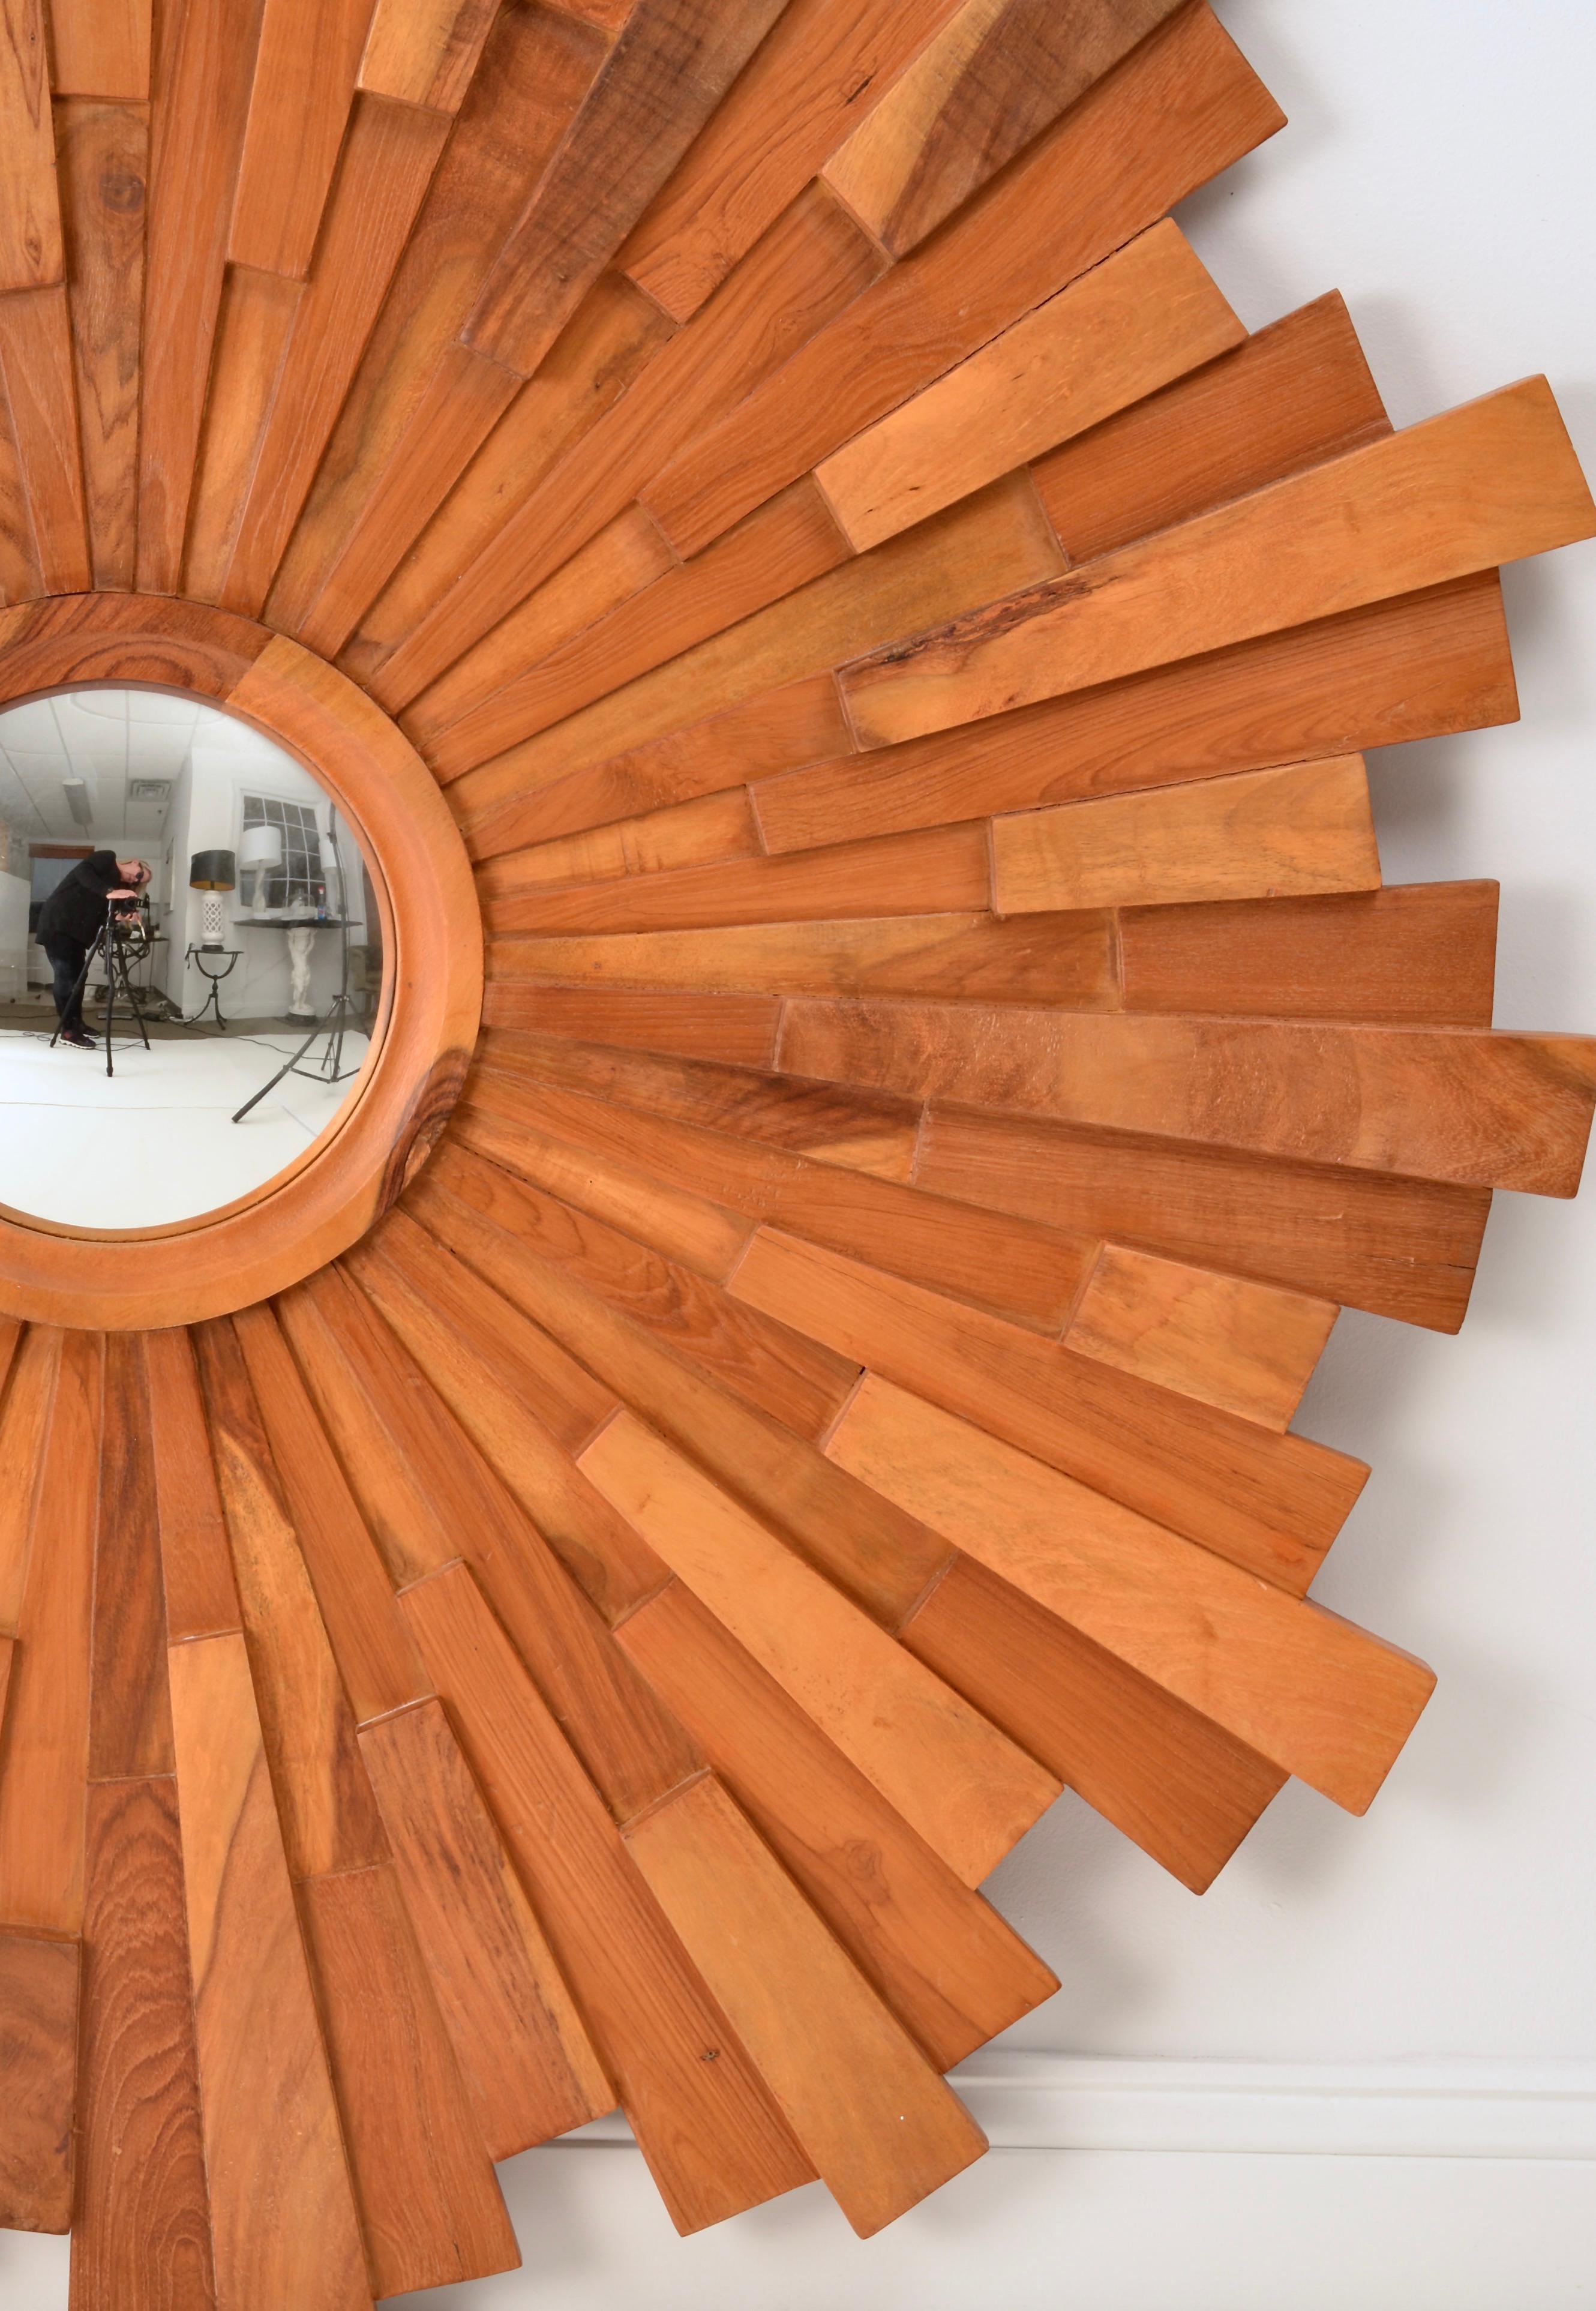 Wonderful size on this piece. Brutalist-style layers of solid walnut surround a center bulls-eye mirror. Quality construction. Warm natural oiled finish. Solid back. Measure: 48